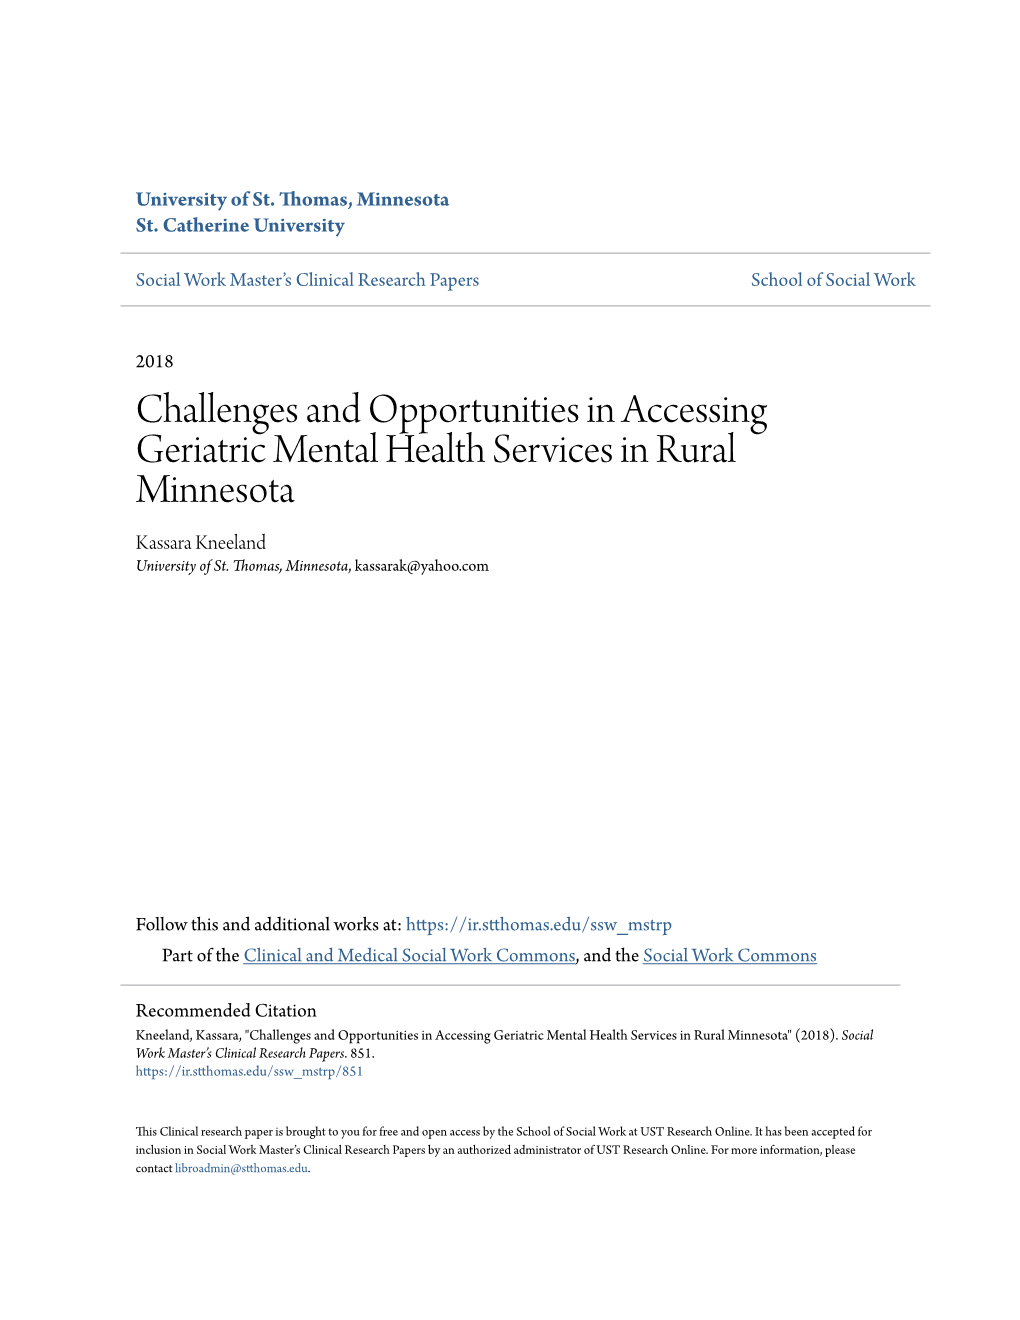 Challenges and Opportunities in Accessing Geriatric Mental Health Services in Rural Minnesota Kassara Kneeland University of St